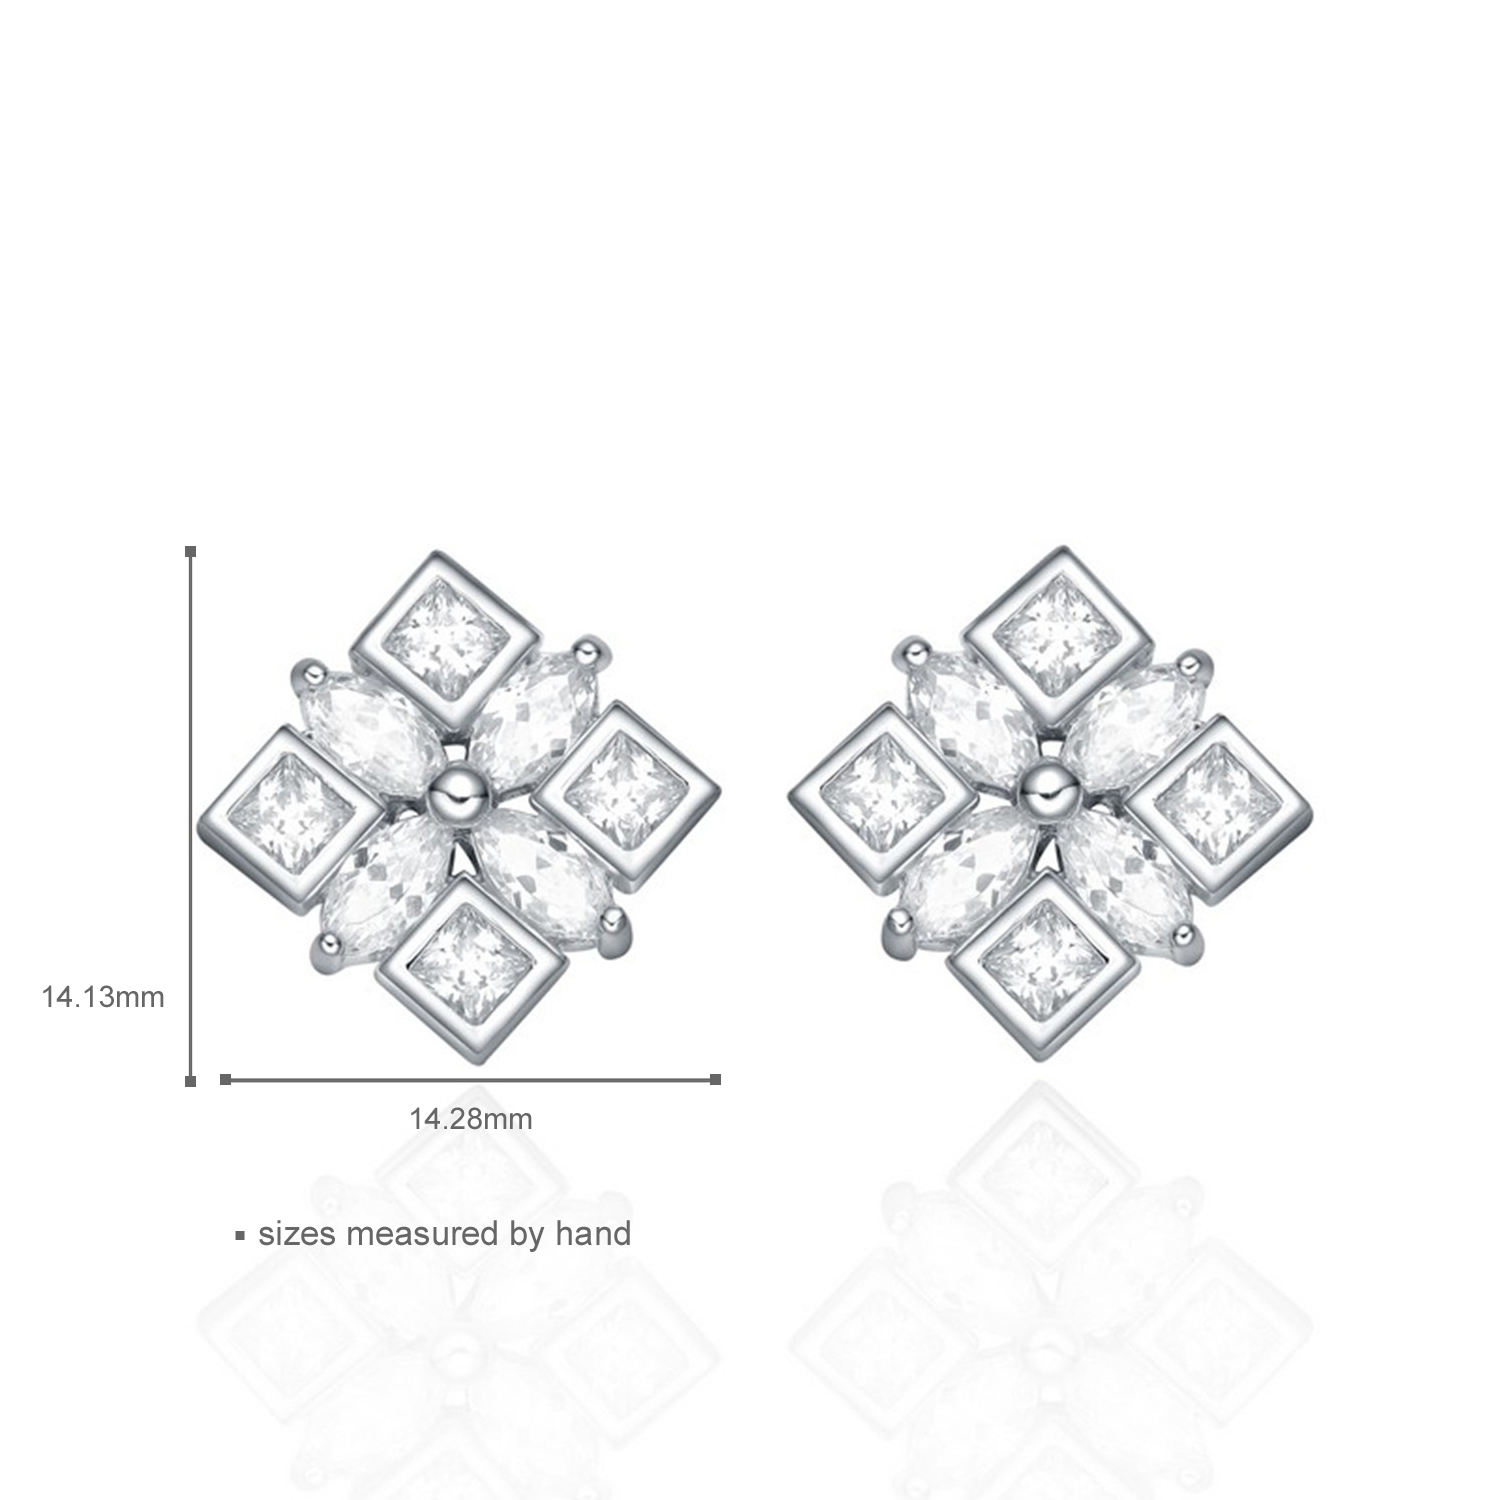  925 Sterling Silver Square Cubic Zircon Pendant Necklace Earrings Light Daily Wearing Jewelry Set(图4)